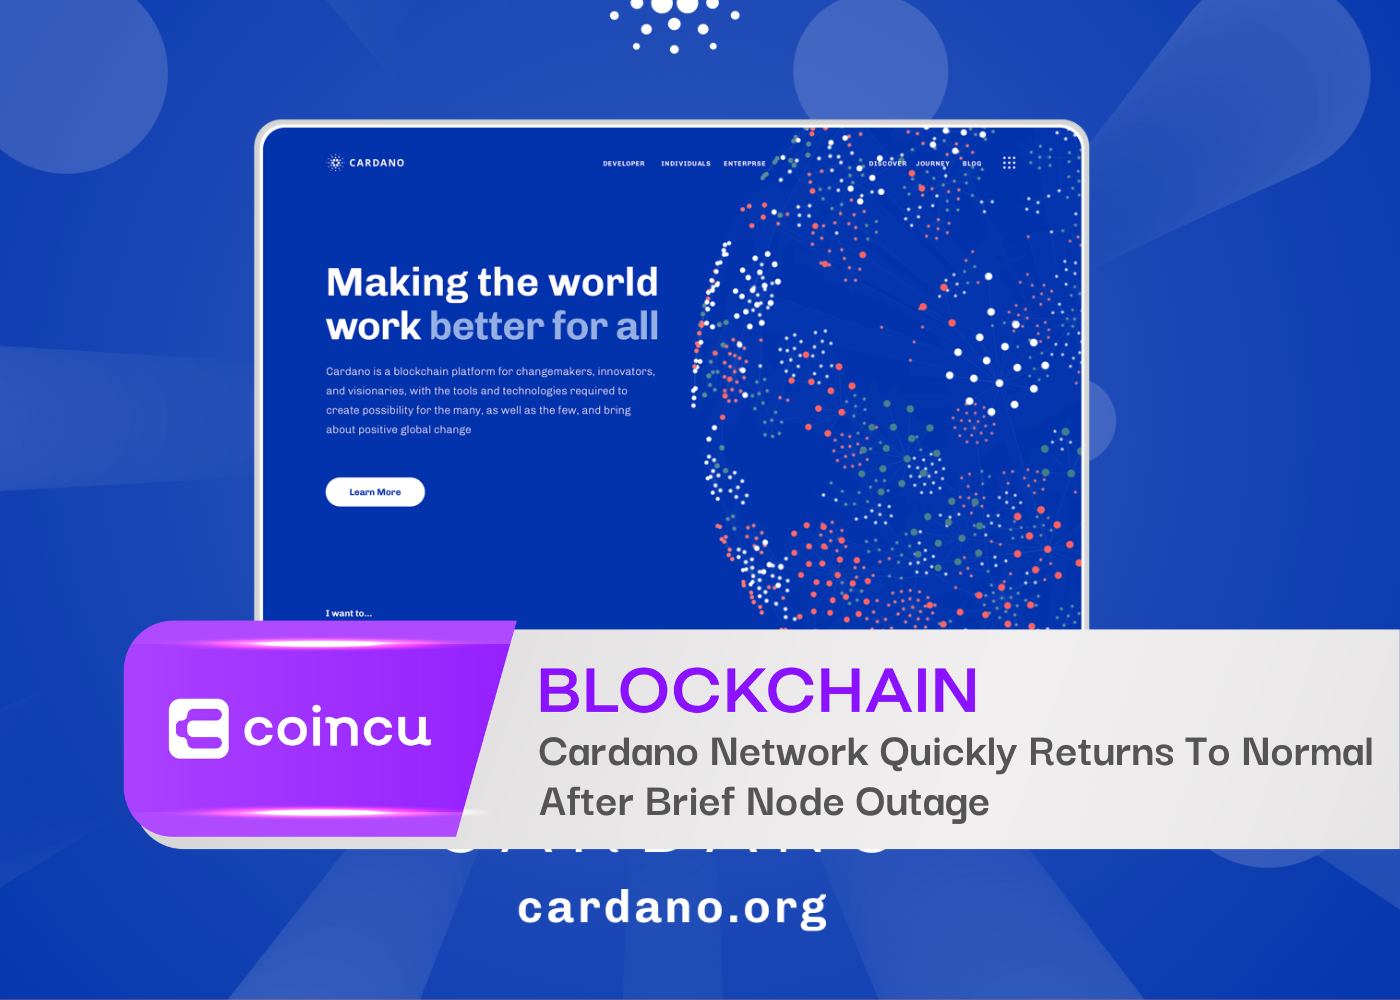 Cardano Network Quickly Returns To Normal